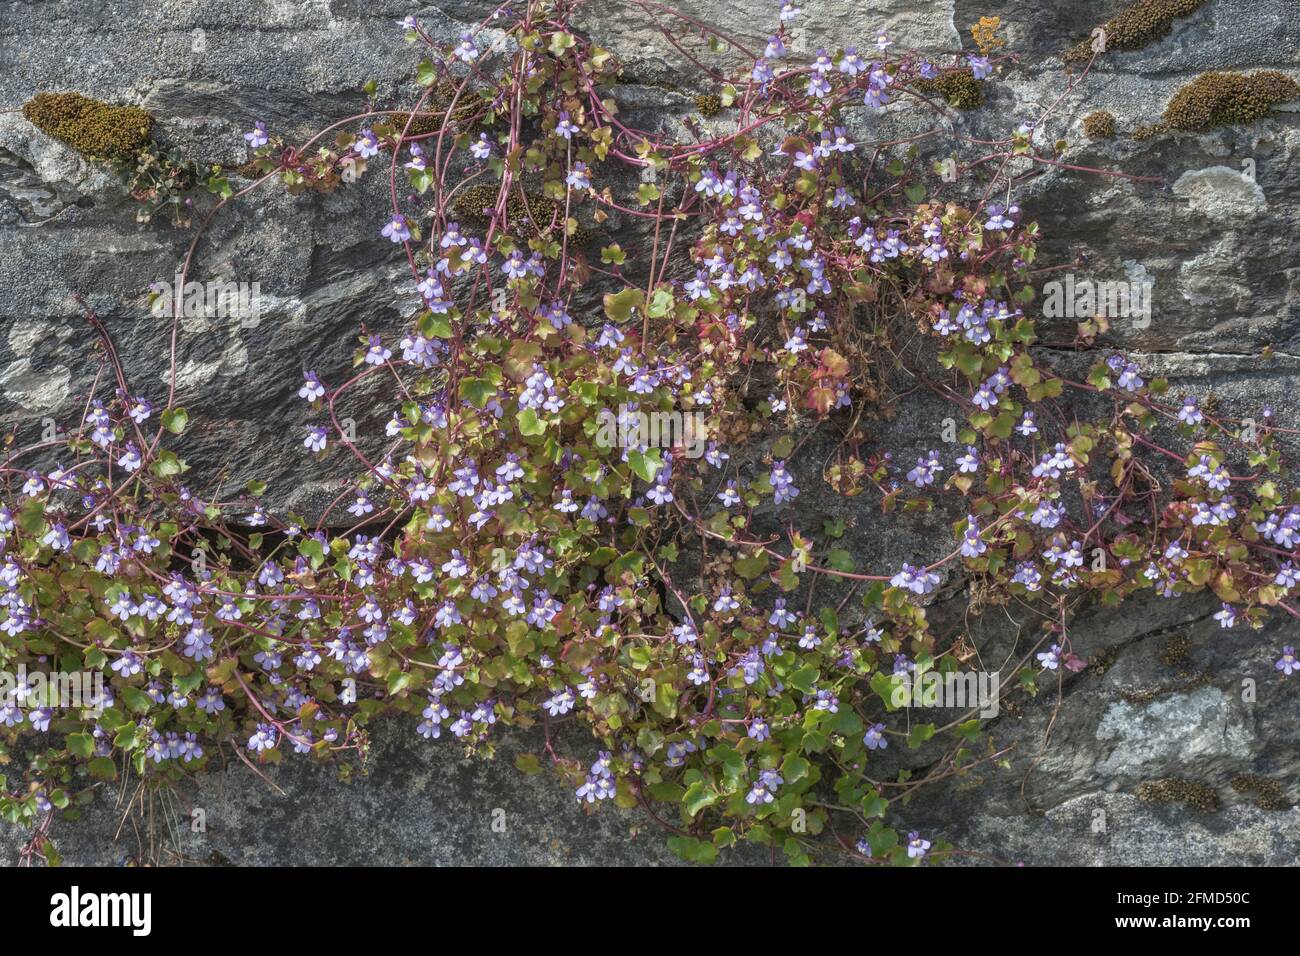 Flowering Ivy-leaved Toadflax / Cymbalaria muralis growing in a stone wall. Once used as a medicinal plant for herbal remedies. Stock Photo